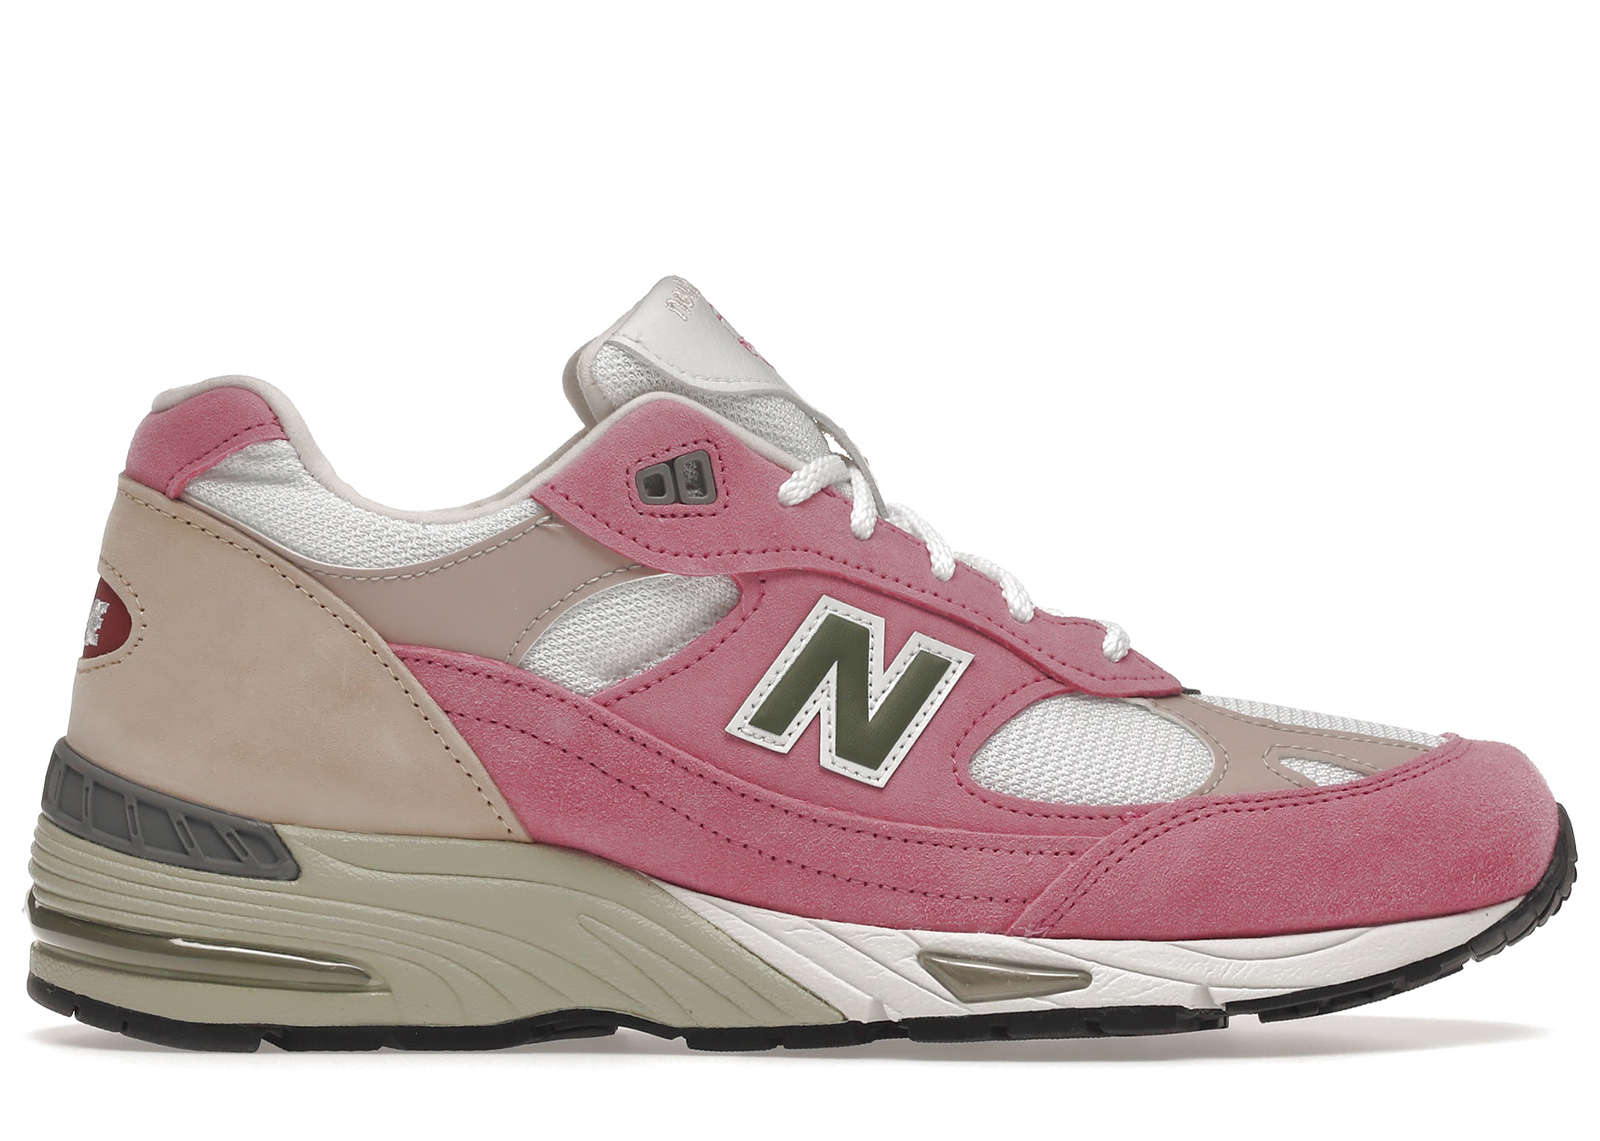 Buy New Balance 991 Shoes & Deadstock Sneakers